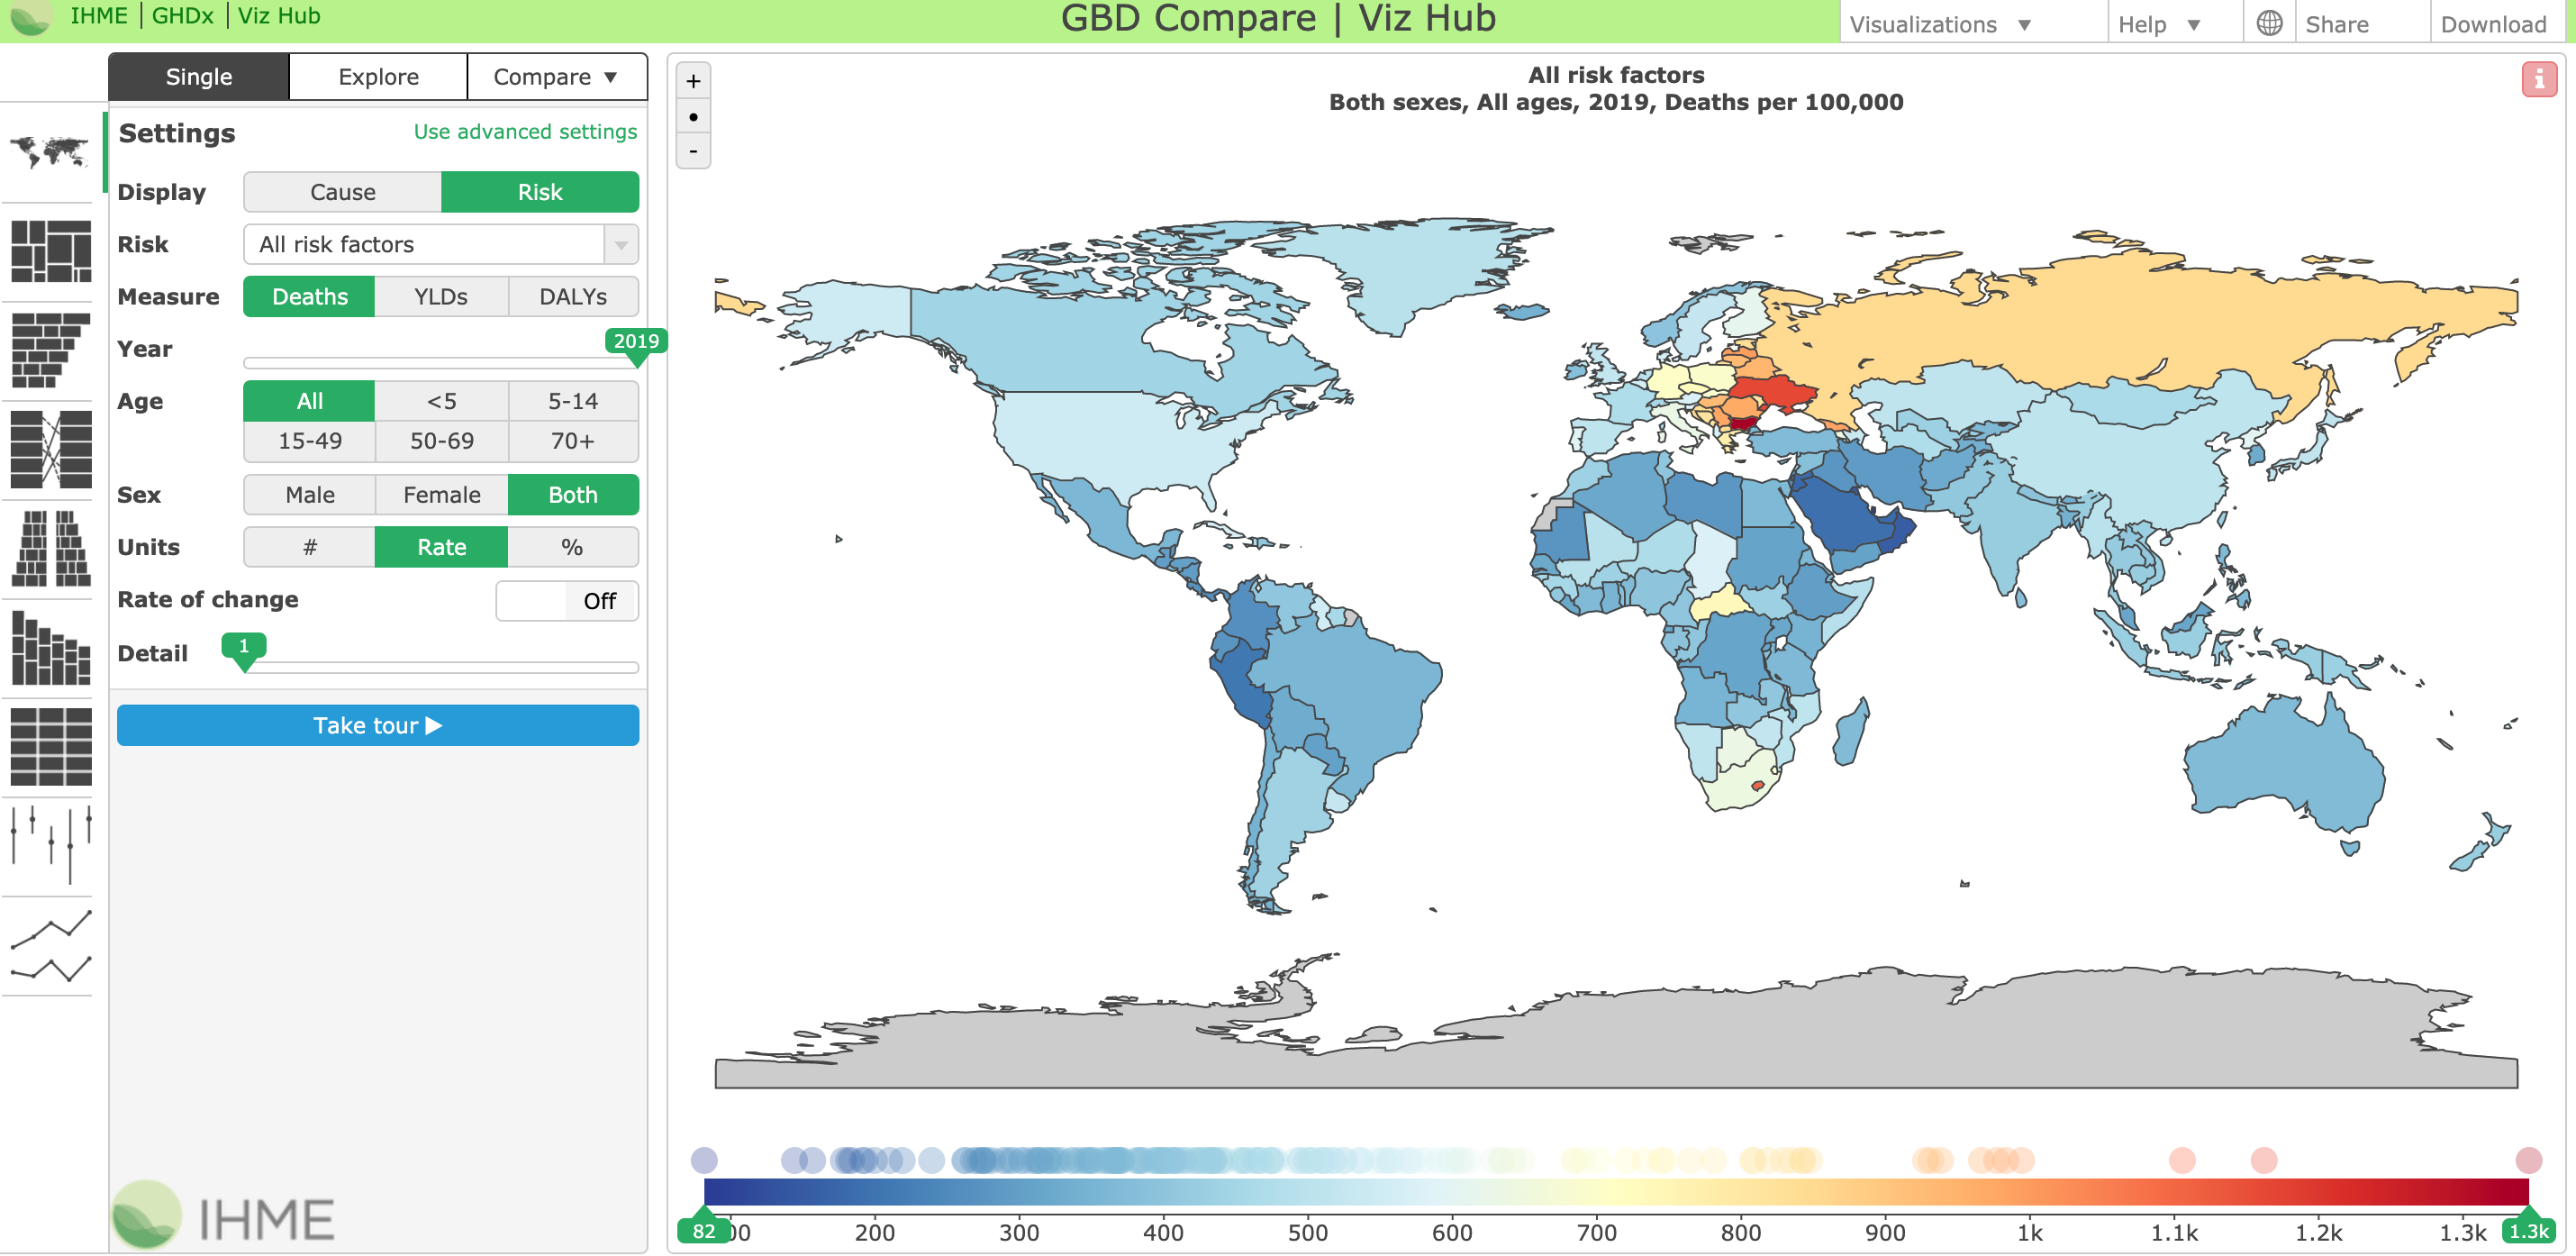 Interactive maps allow users to analyze statistics by region.